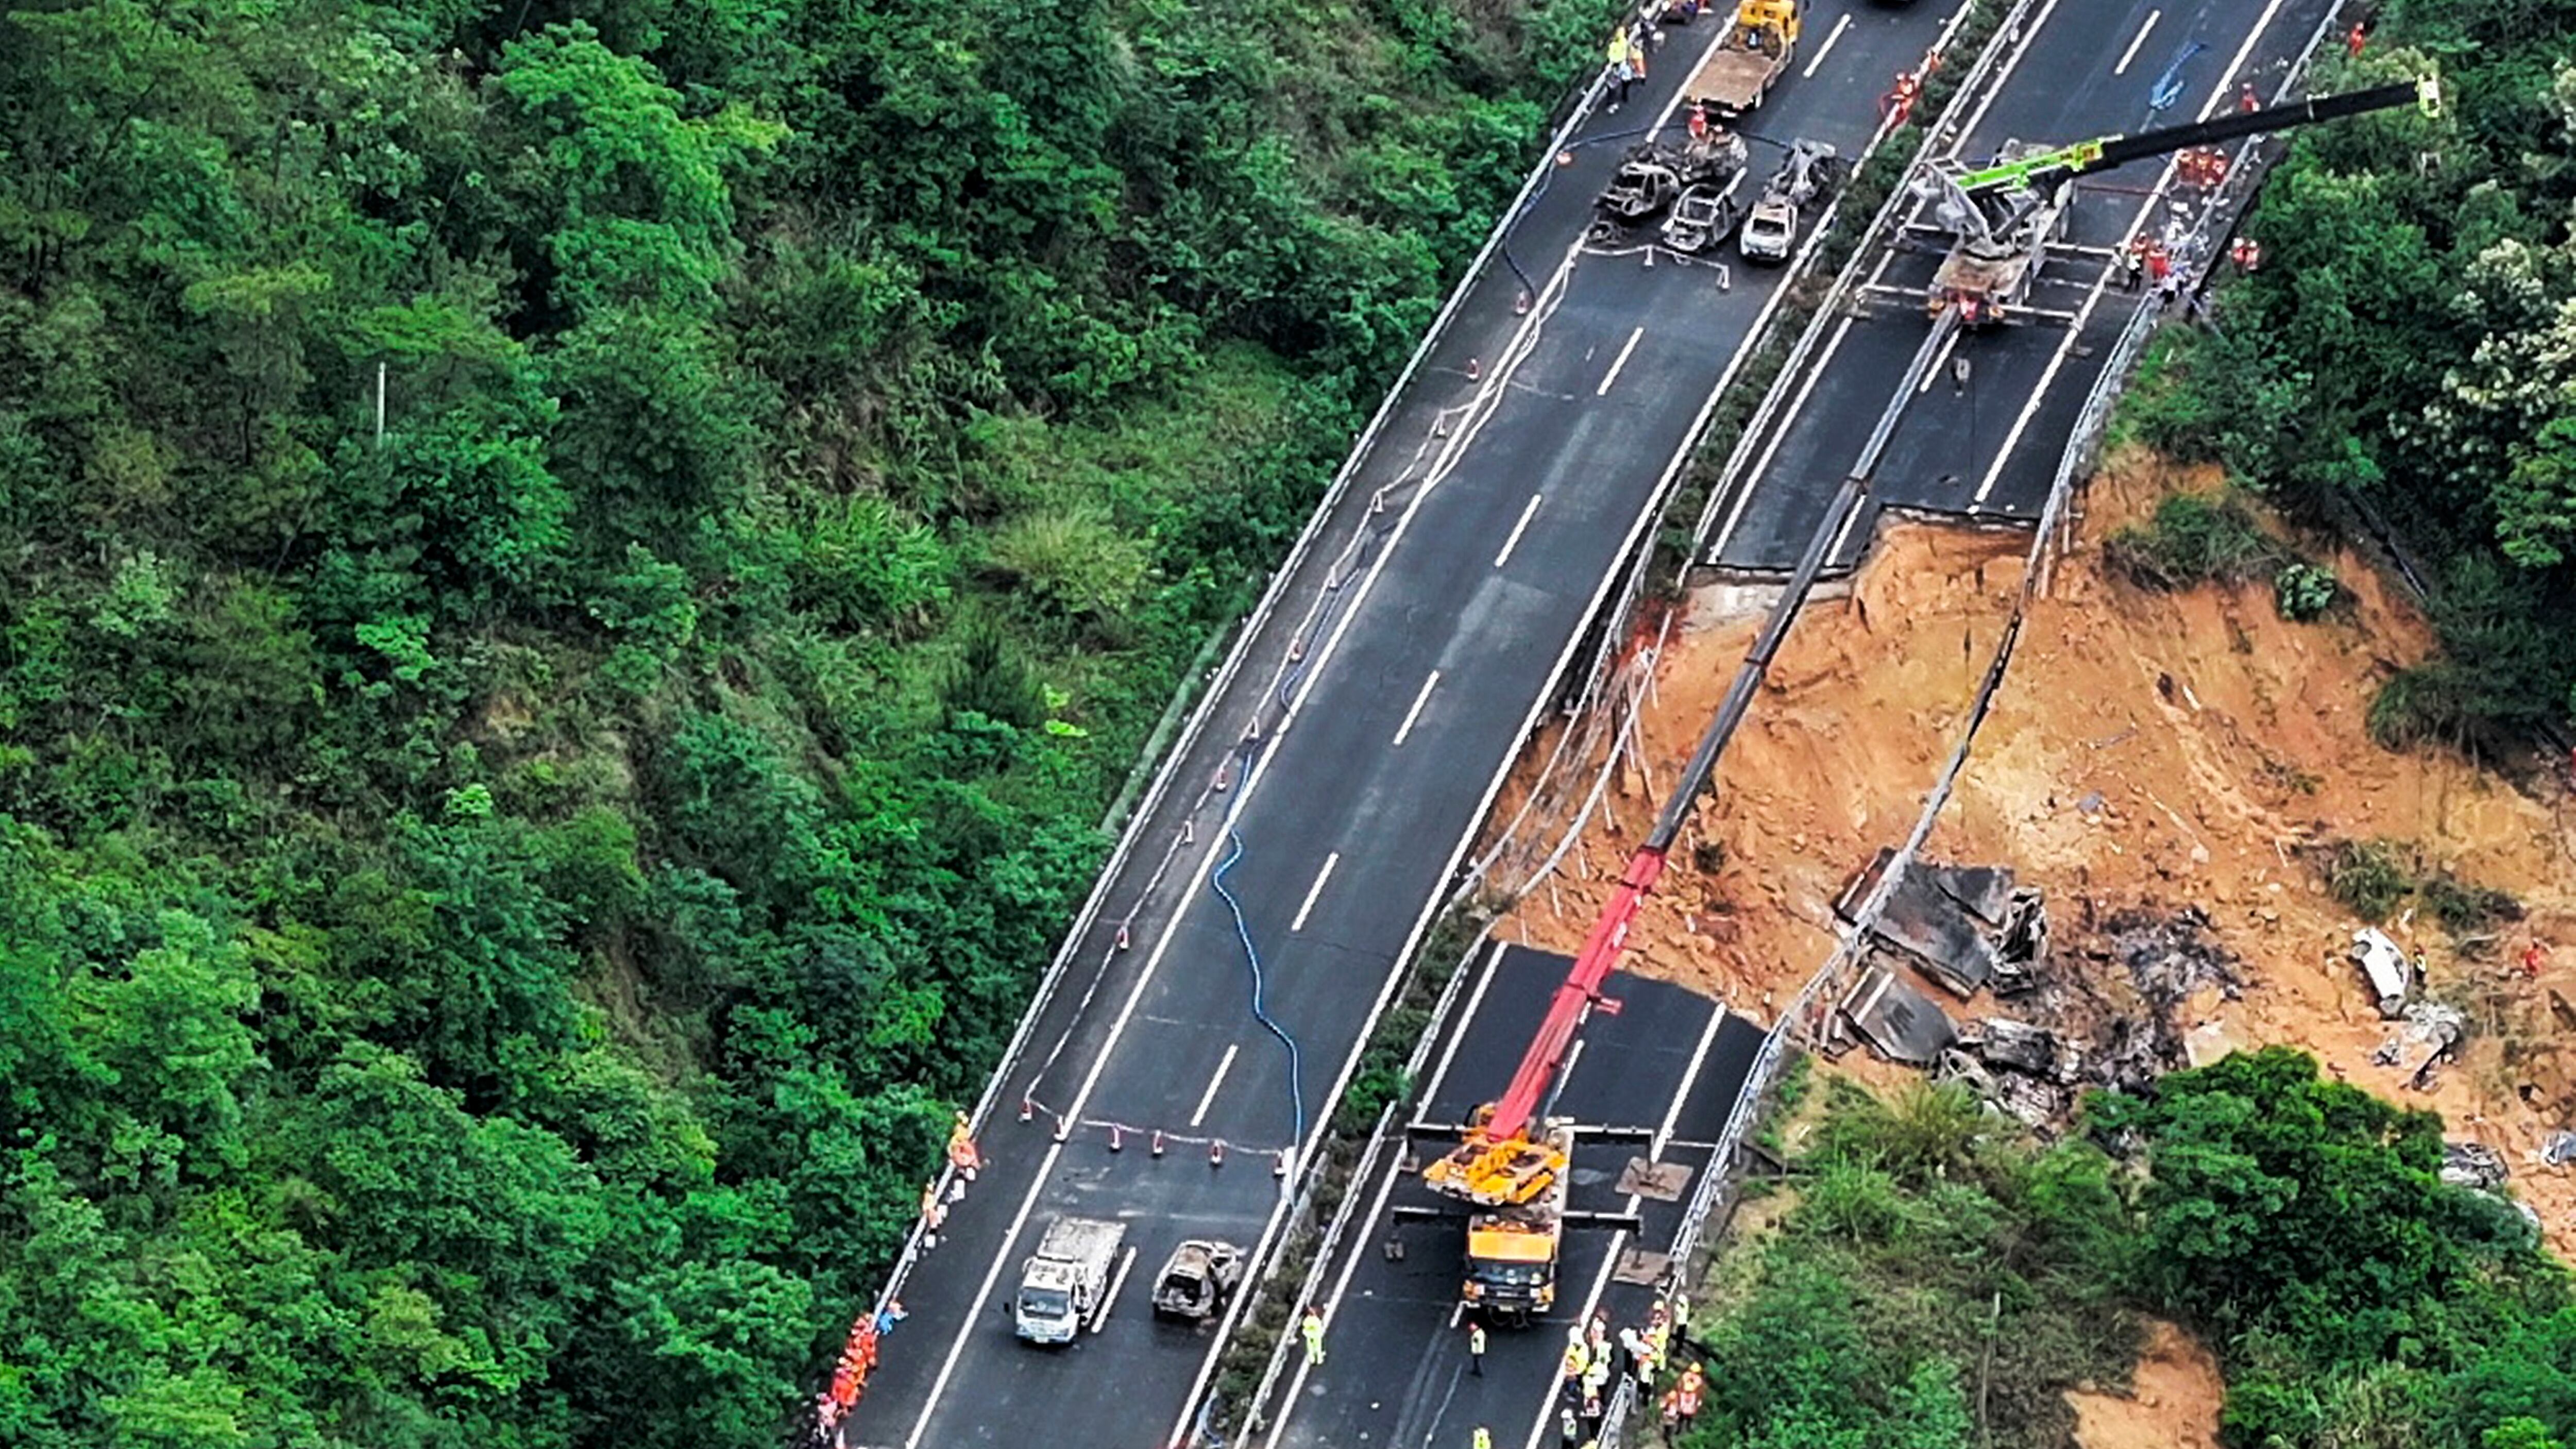 At least 24 people were killed when a section of the Meizhou-Dabu Expressway in southern China collapsed early on Wednesday (Xinhua News Agency/AP)